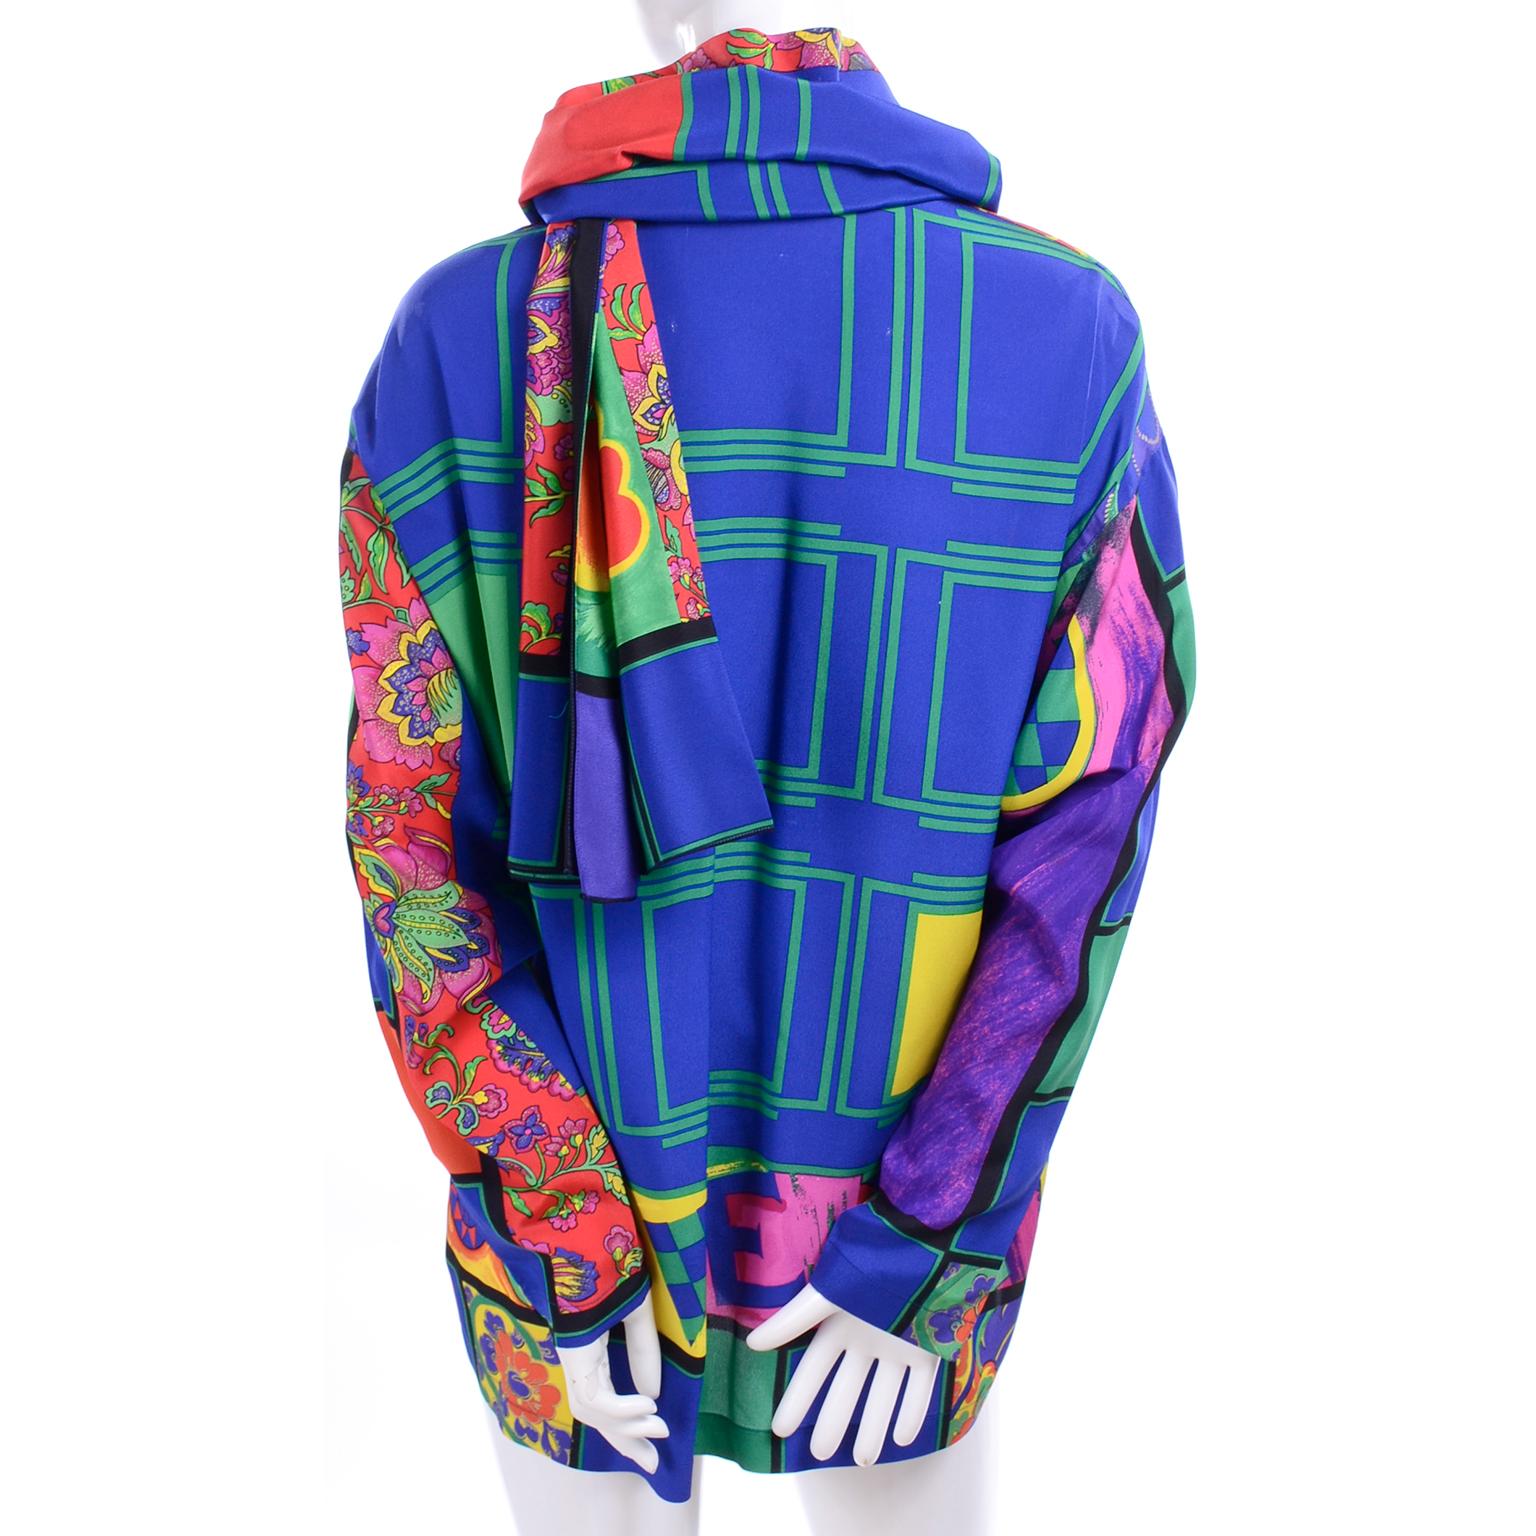 Women's Gianni Versace Early 1990s Bright Colorful Vintage Silk Print Shirt & Huge Scarf For Sale